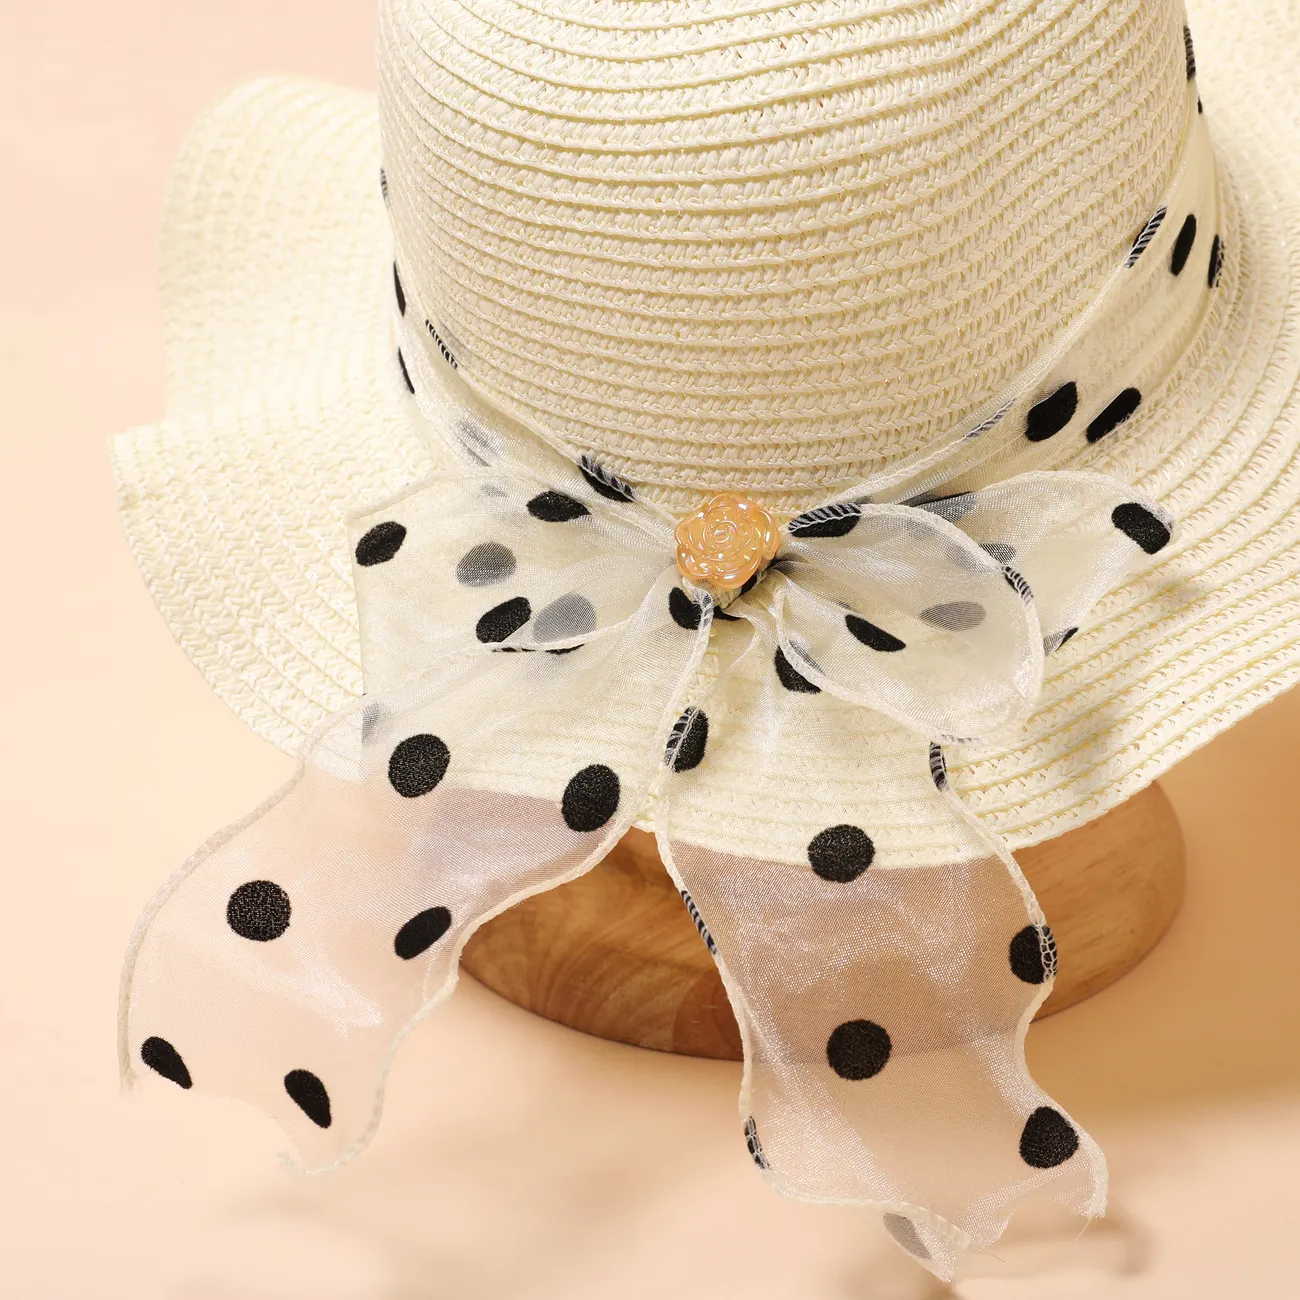 Summer Girls' Straw Hat with Polka Dot Ribbon for Beach and Sun Protection, Ages 2-5 Creamy White big image 1